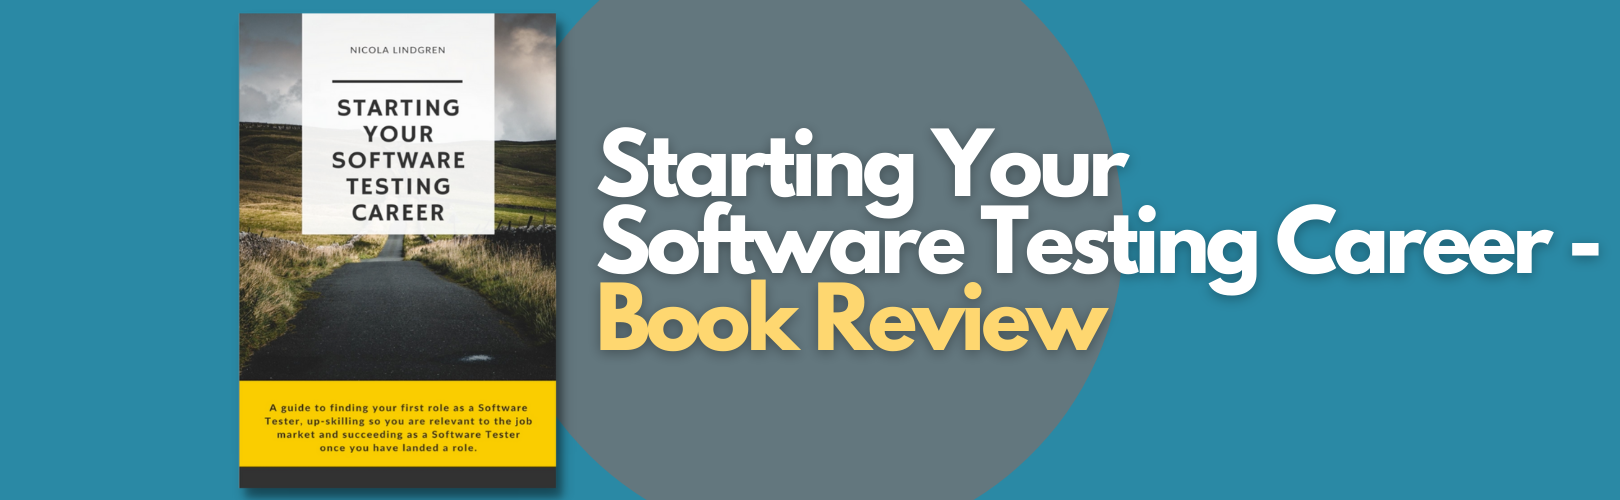 Starting Your Software Testing Career - Book Review Adventures in QA